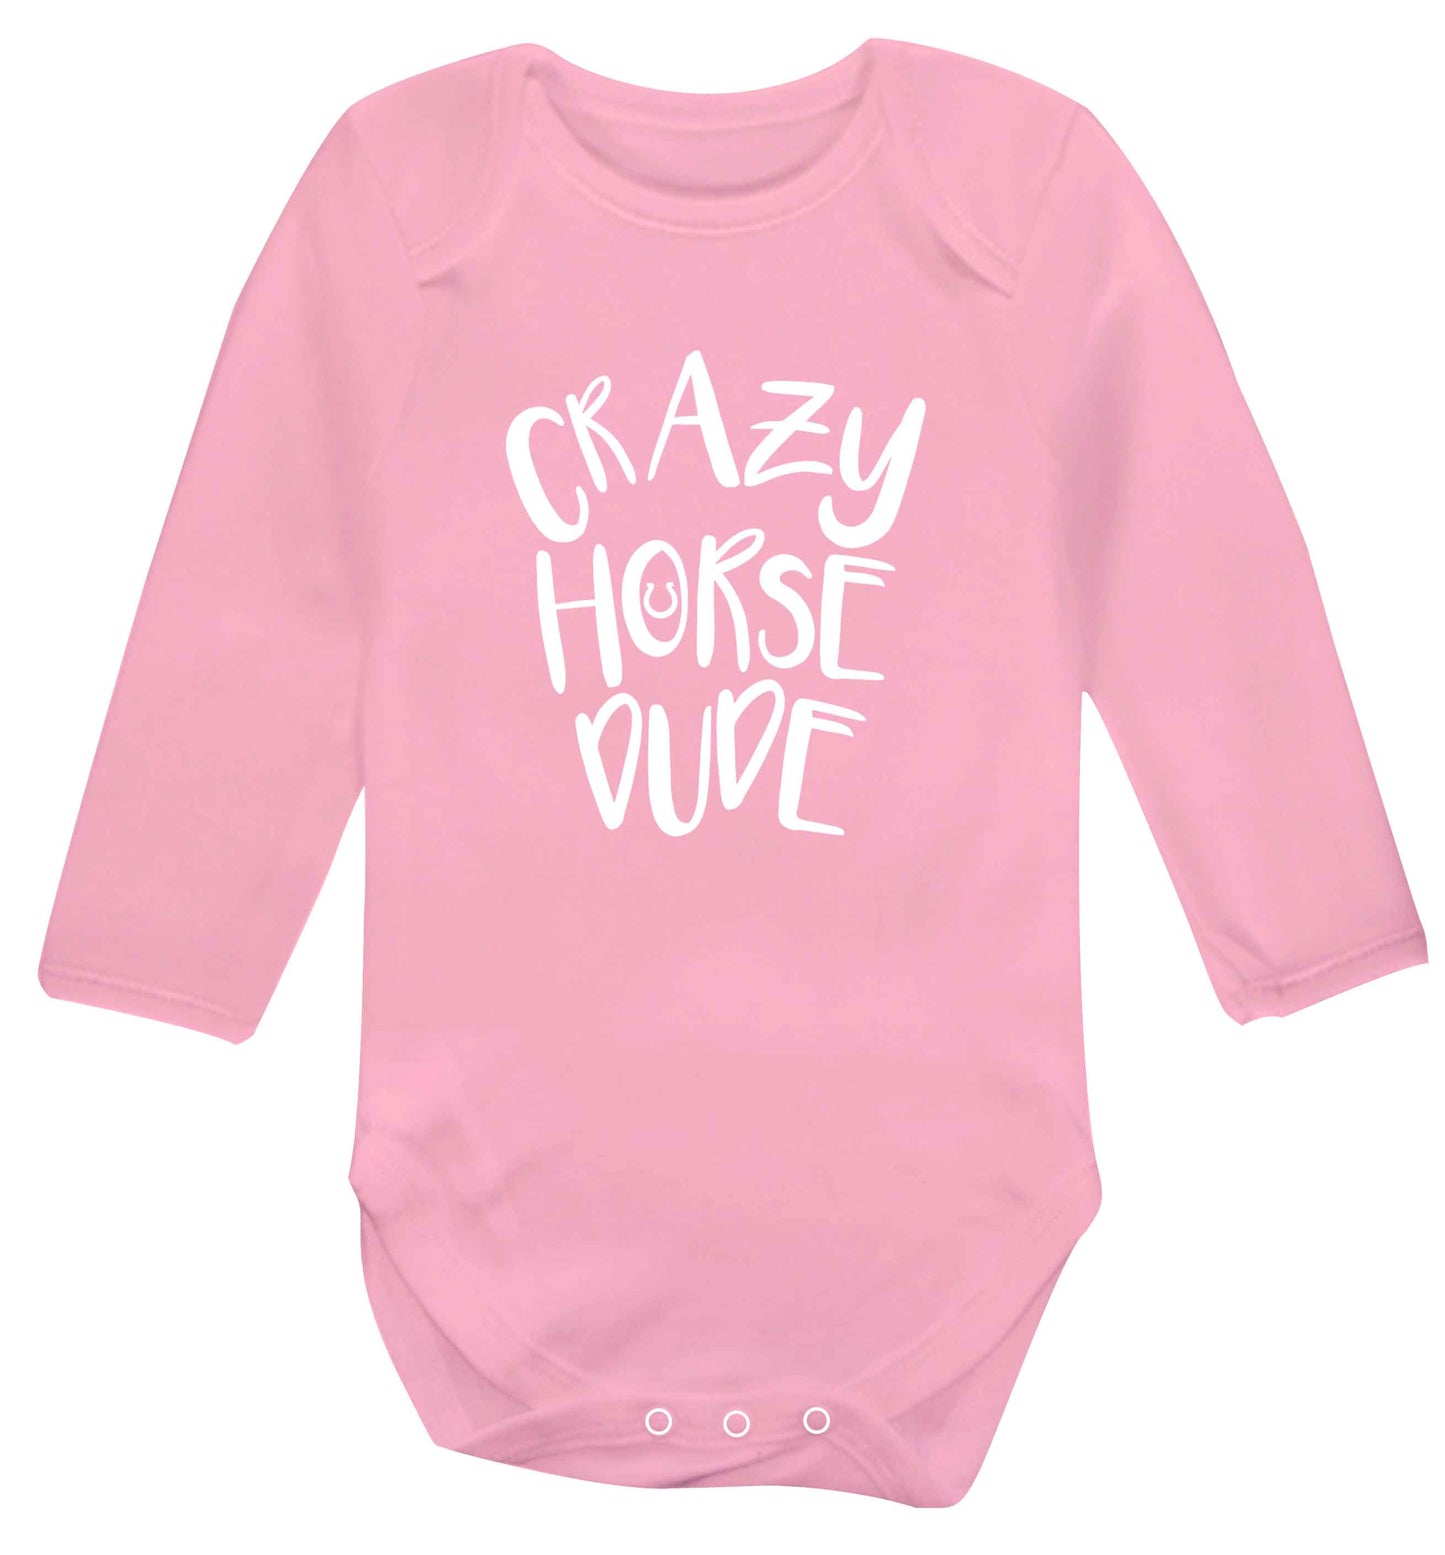 Crazy horse dude baby vest long sleeved pale pink 6-12 months